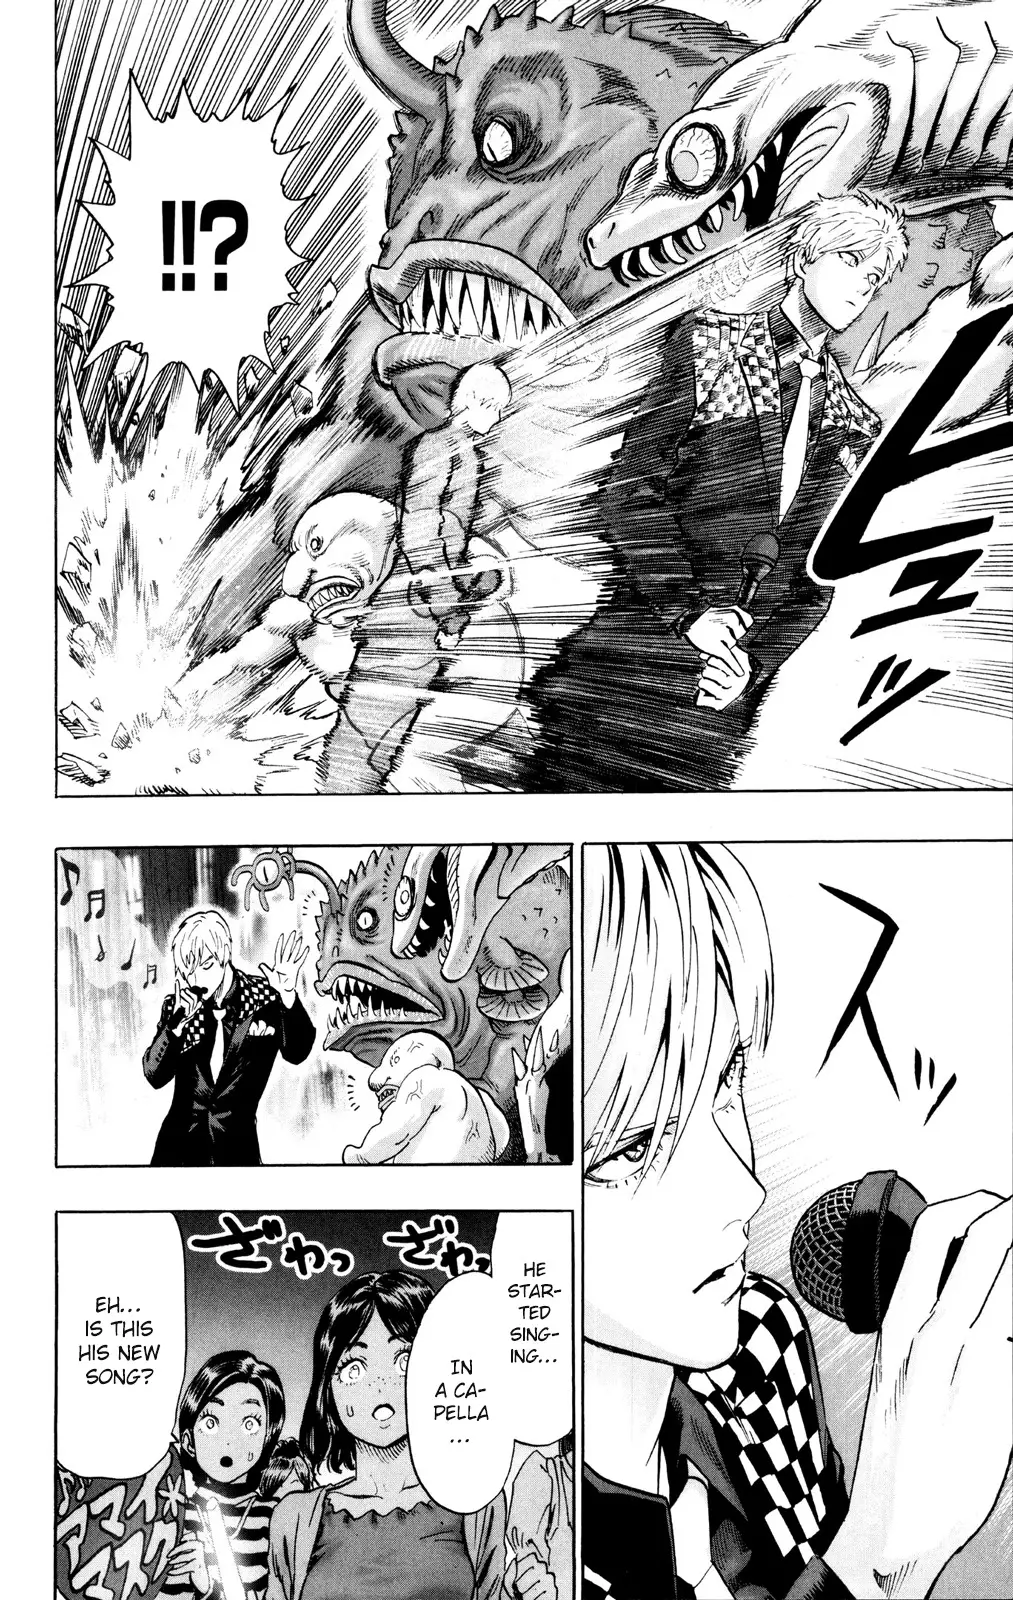 One Punch Man Chapter 71.1, READ One Punch Man Chapter 71.1 ONLINE, lost in the cloud genre,lost in the cloud gif,lost in the cloud girl,lost in the cloud goods,lost in the cloud goodreads,lost in the cloud,lost ark cloud gaming,lost odyssey cloud gaming,lost in the cloud fanart,lost in the cloud fanfic,lost in the cloud fandom,lost in the cloud first kiss,lost in the cloud font,lost in the cloud ending,lost in the cloud episode 97,lost in the cloud edit,lost in the cloud explained,lost in the cloud dog,lost in the cloud discord server,lost in the cloud desktop wallpaper,lost in the cloud drawing,can't find my cloud on network,lost in the cloud characters,lost in the cloud chapter 93 release date,lost in the cloud birthday,lost in the cloud birthday art,lost in the cloud background,lost in the cloud banner,lost in the clouds meaning,what is the black cloud in lost,lost in the cloud ao3,lost in the cloud anime,lost in the cloud art,lost in the cloud author twitter,lost in the cloud author instagram,lost in the cloud artist,lost in the cloud acrylic stand,lost in the cloud artist twitter,lost in the cloud art style,lost in the cloud analysis